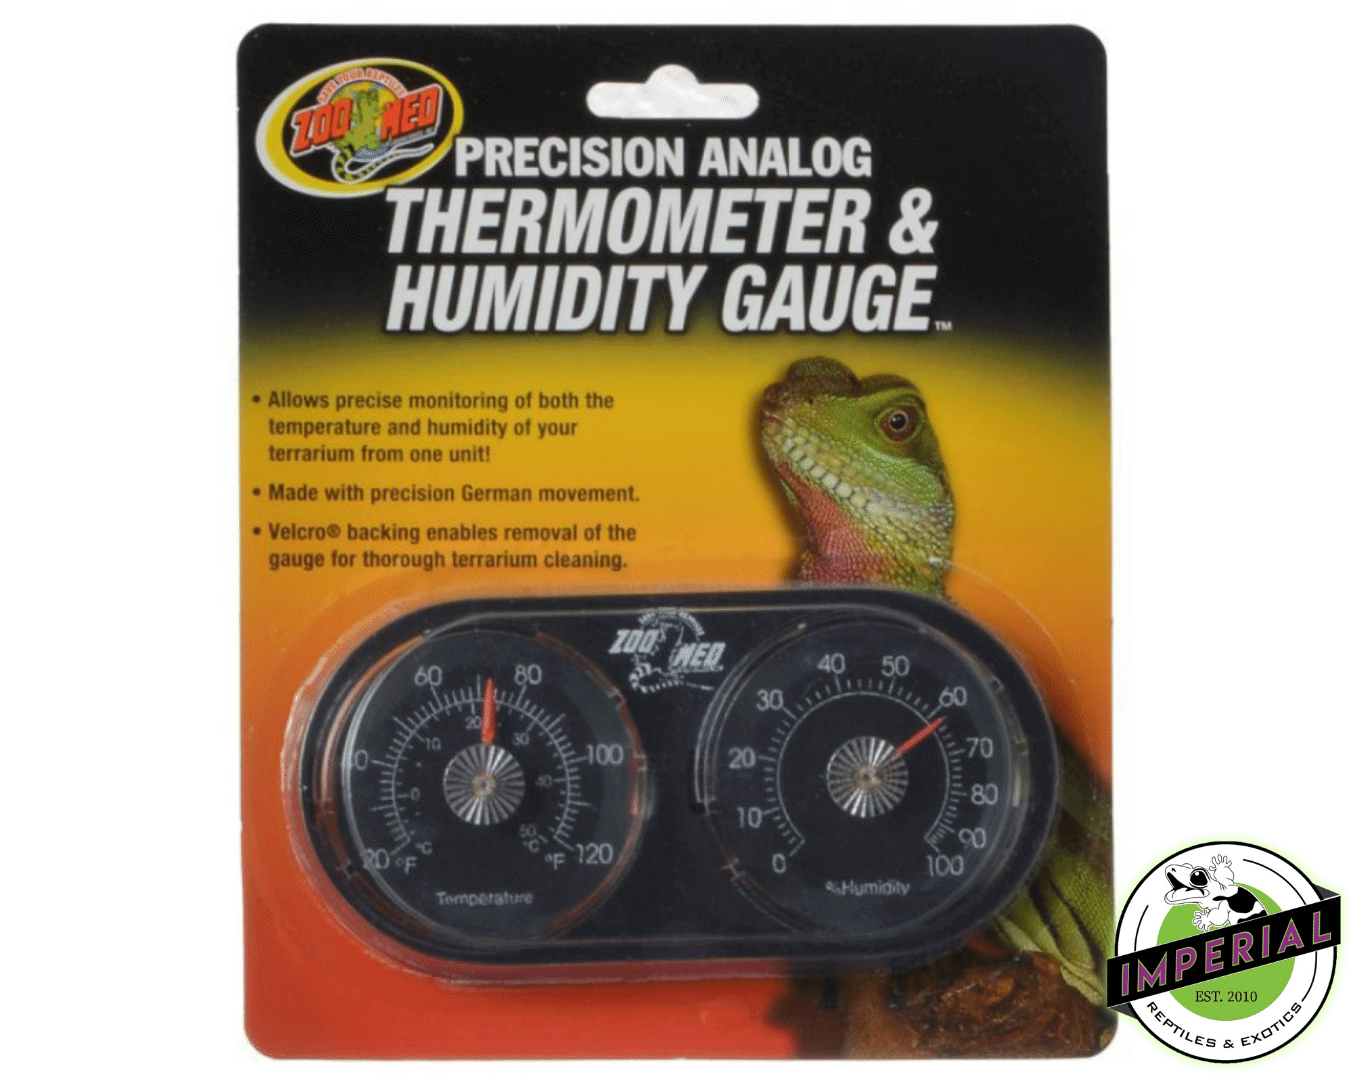 precision analog thermometer & humidity gauge for sale online, buy cheap reptile supplies near me